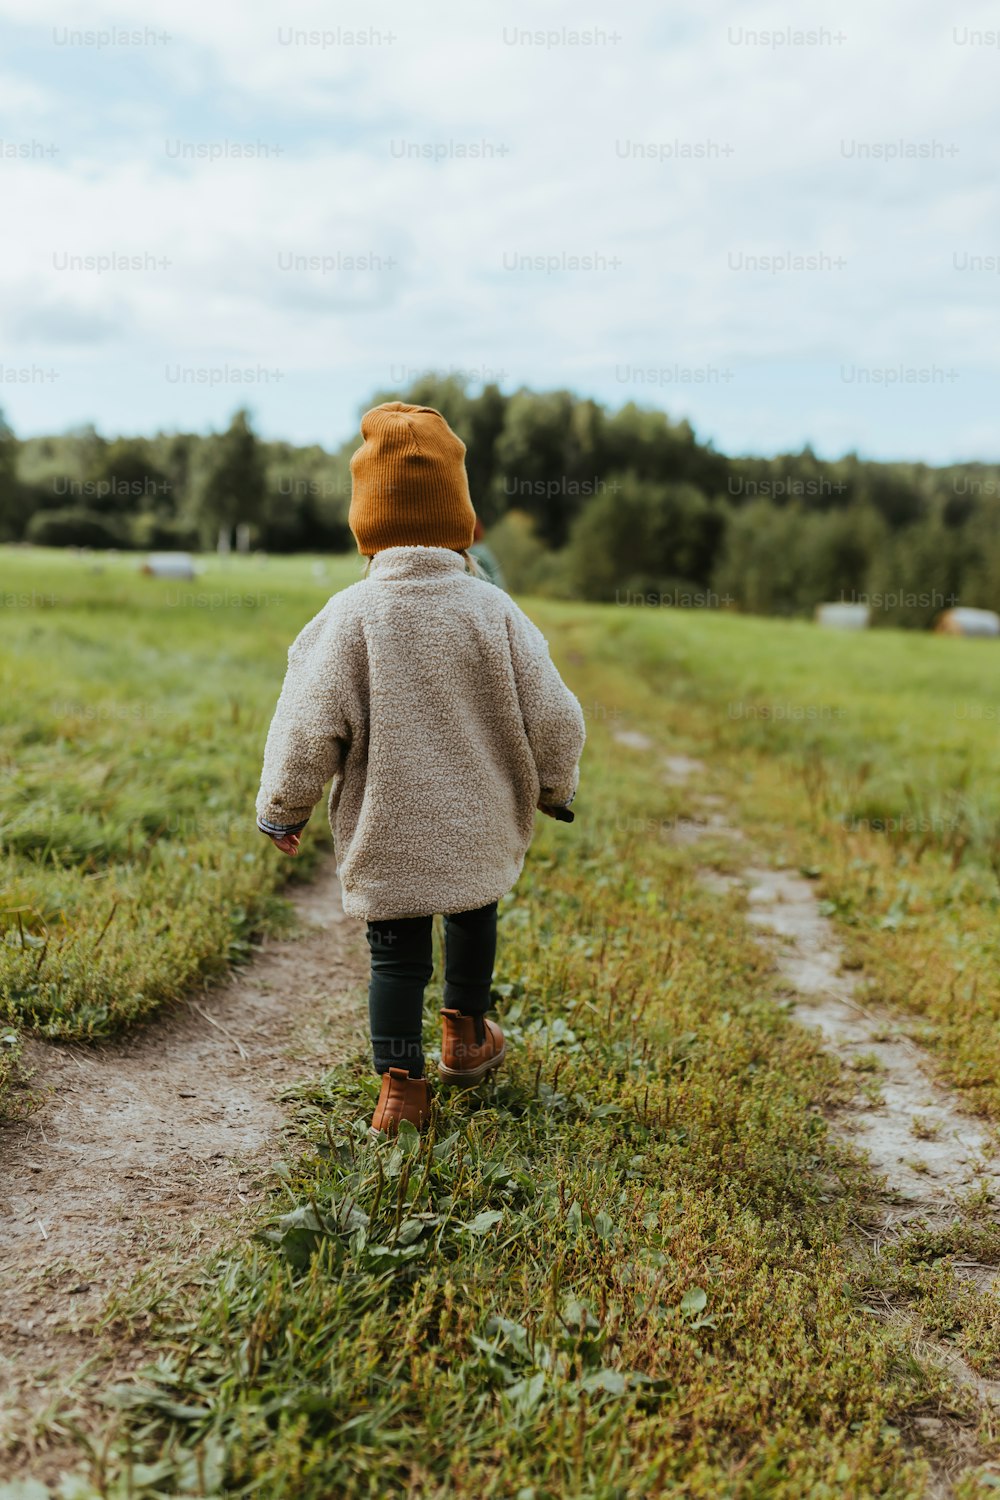 a young child walking down a dirt path